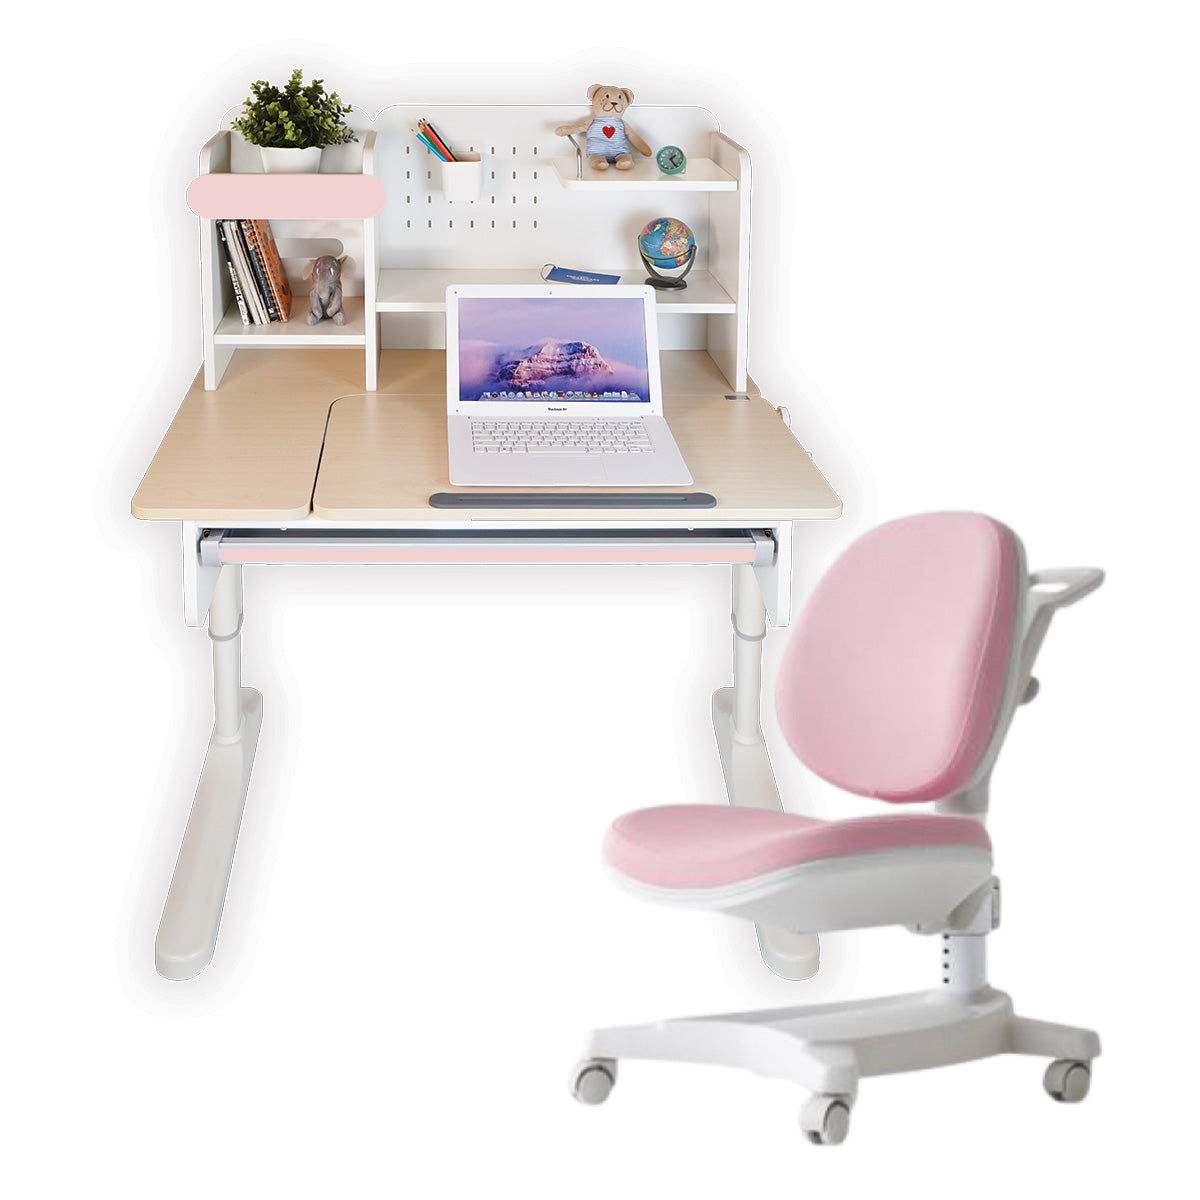 Impact Ergo-Growing Study Desk And Chair Set 1000mm x 650mm, IM-G1000A-PK (Ready Stocks)